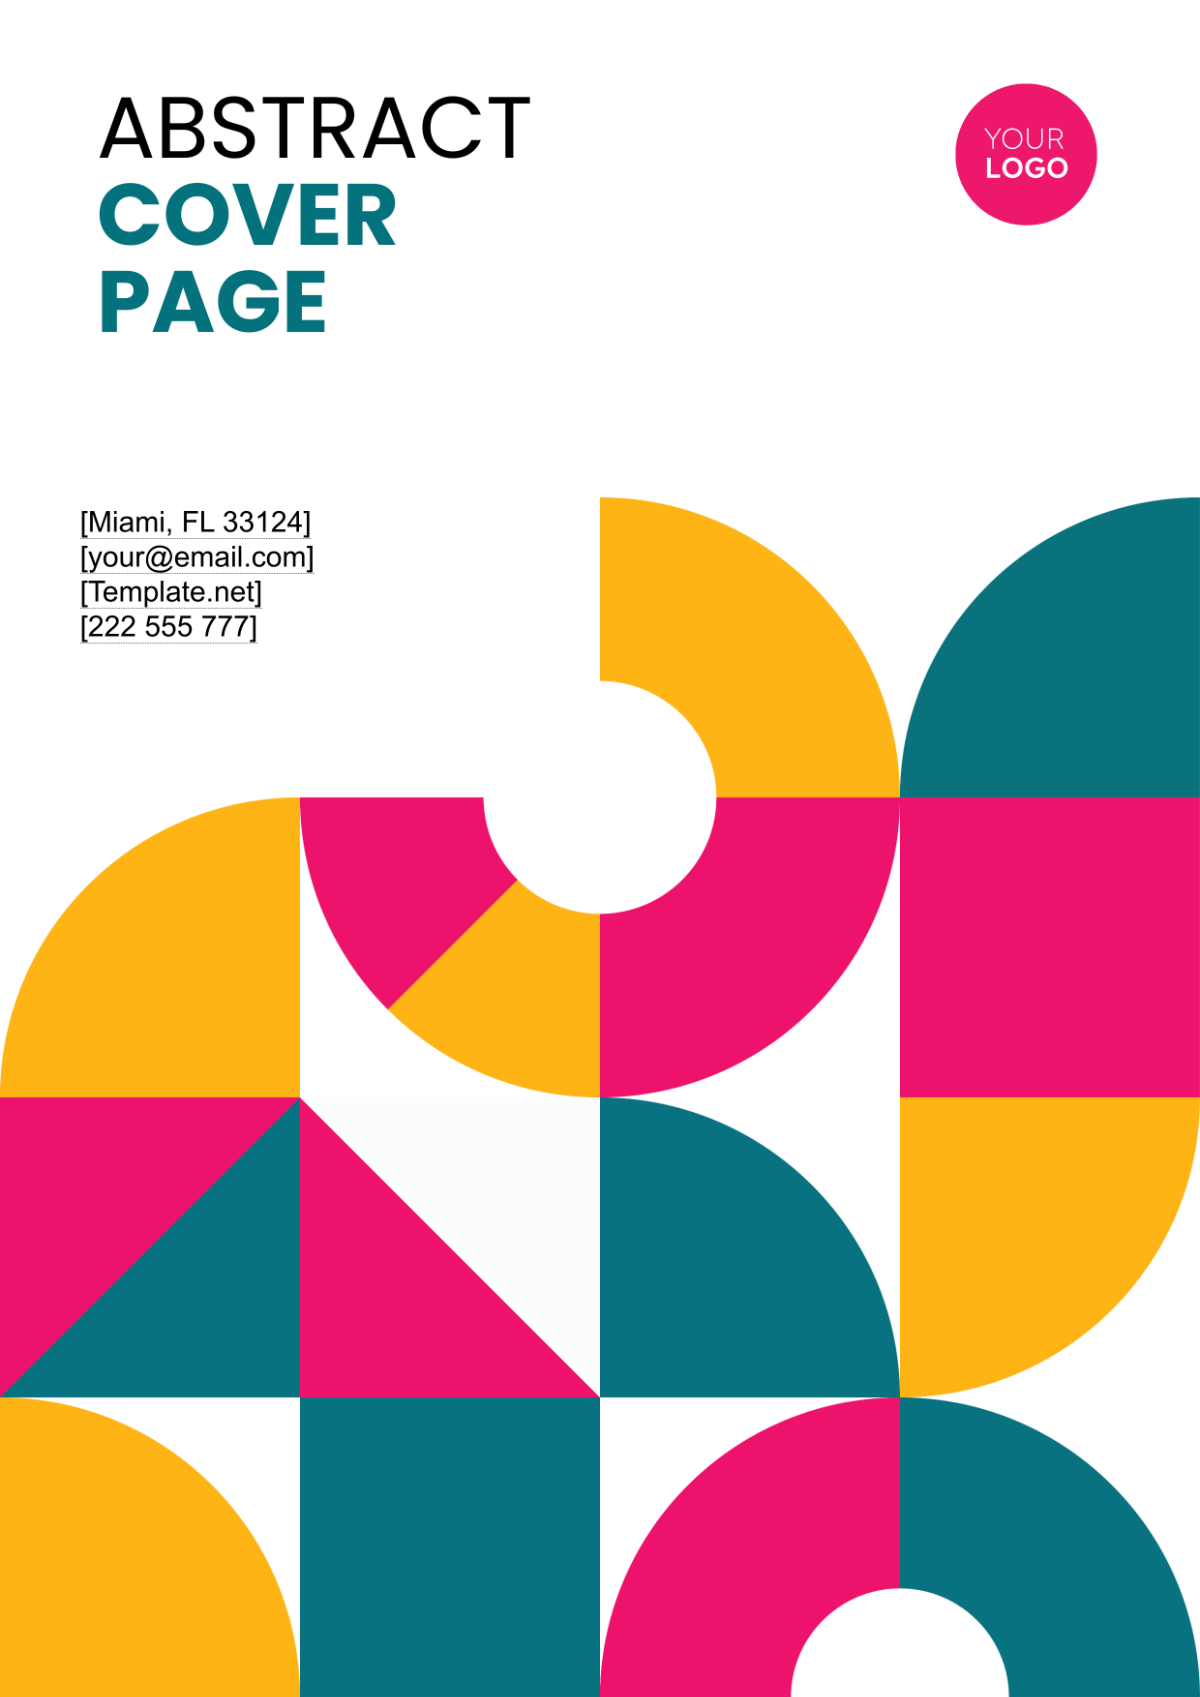 Abstract Cover Page Template